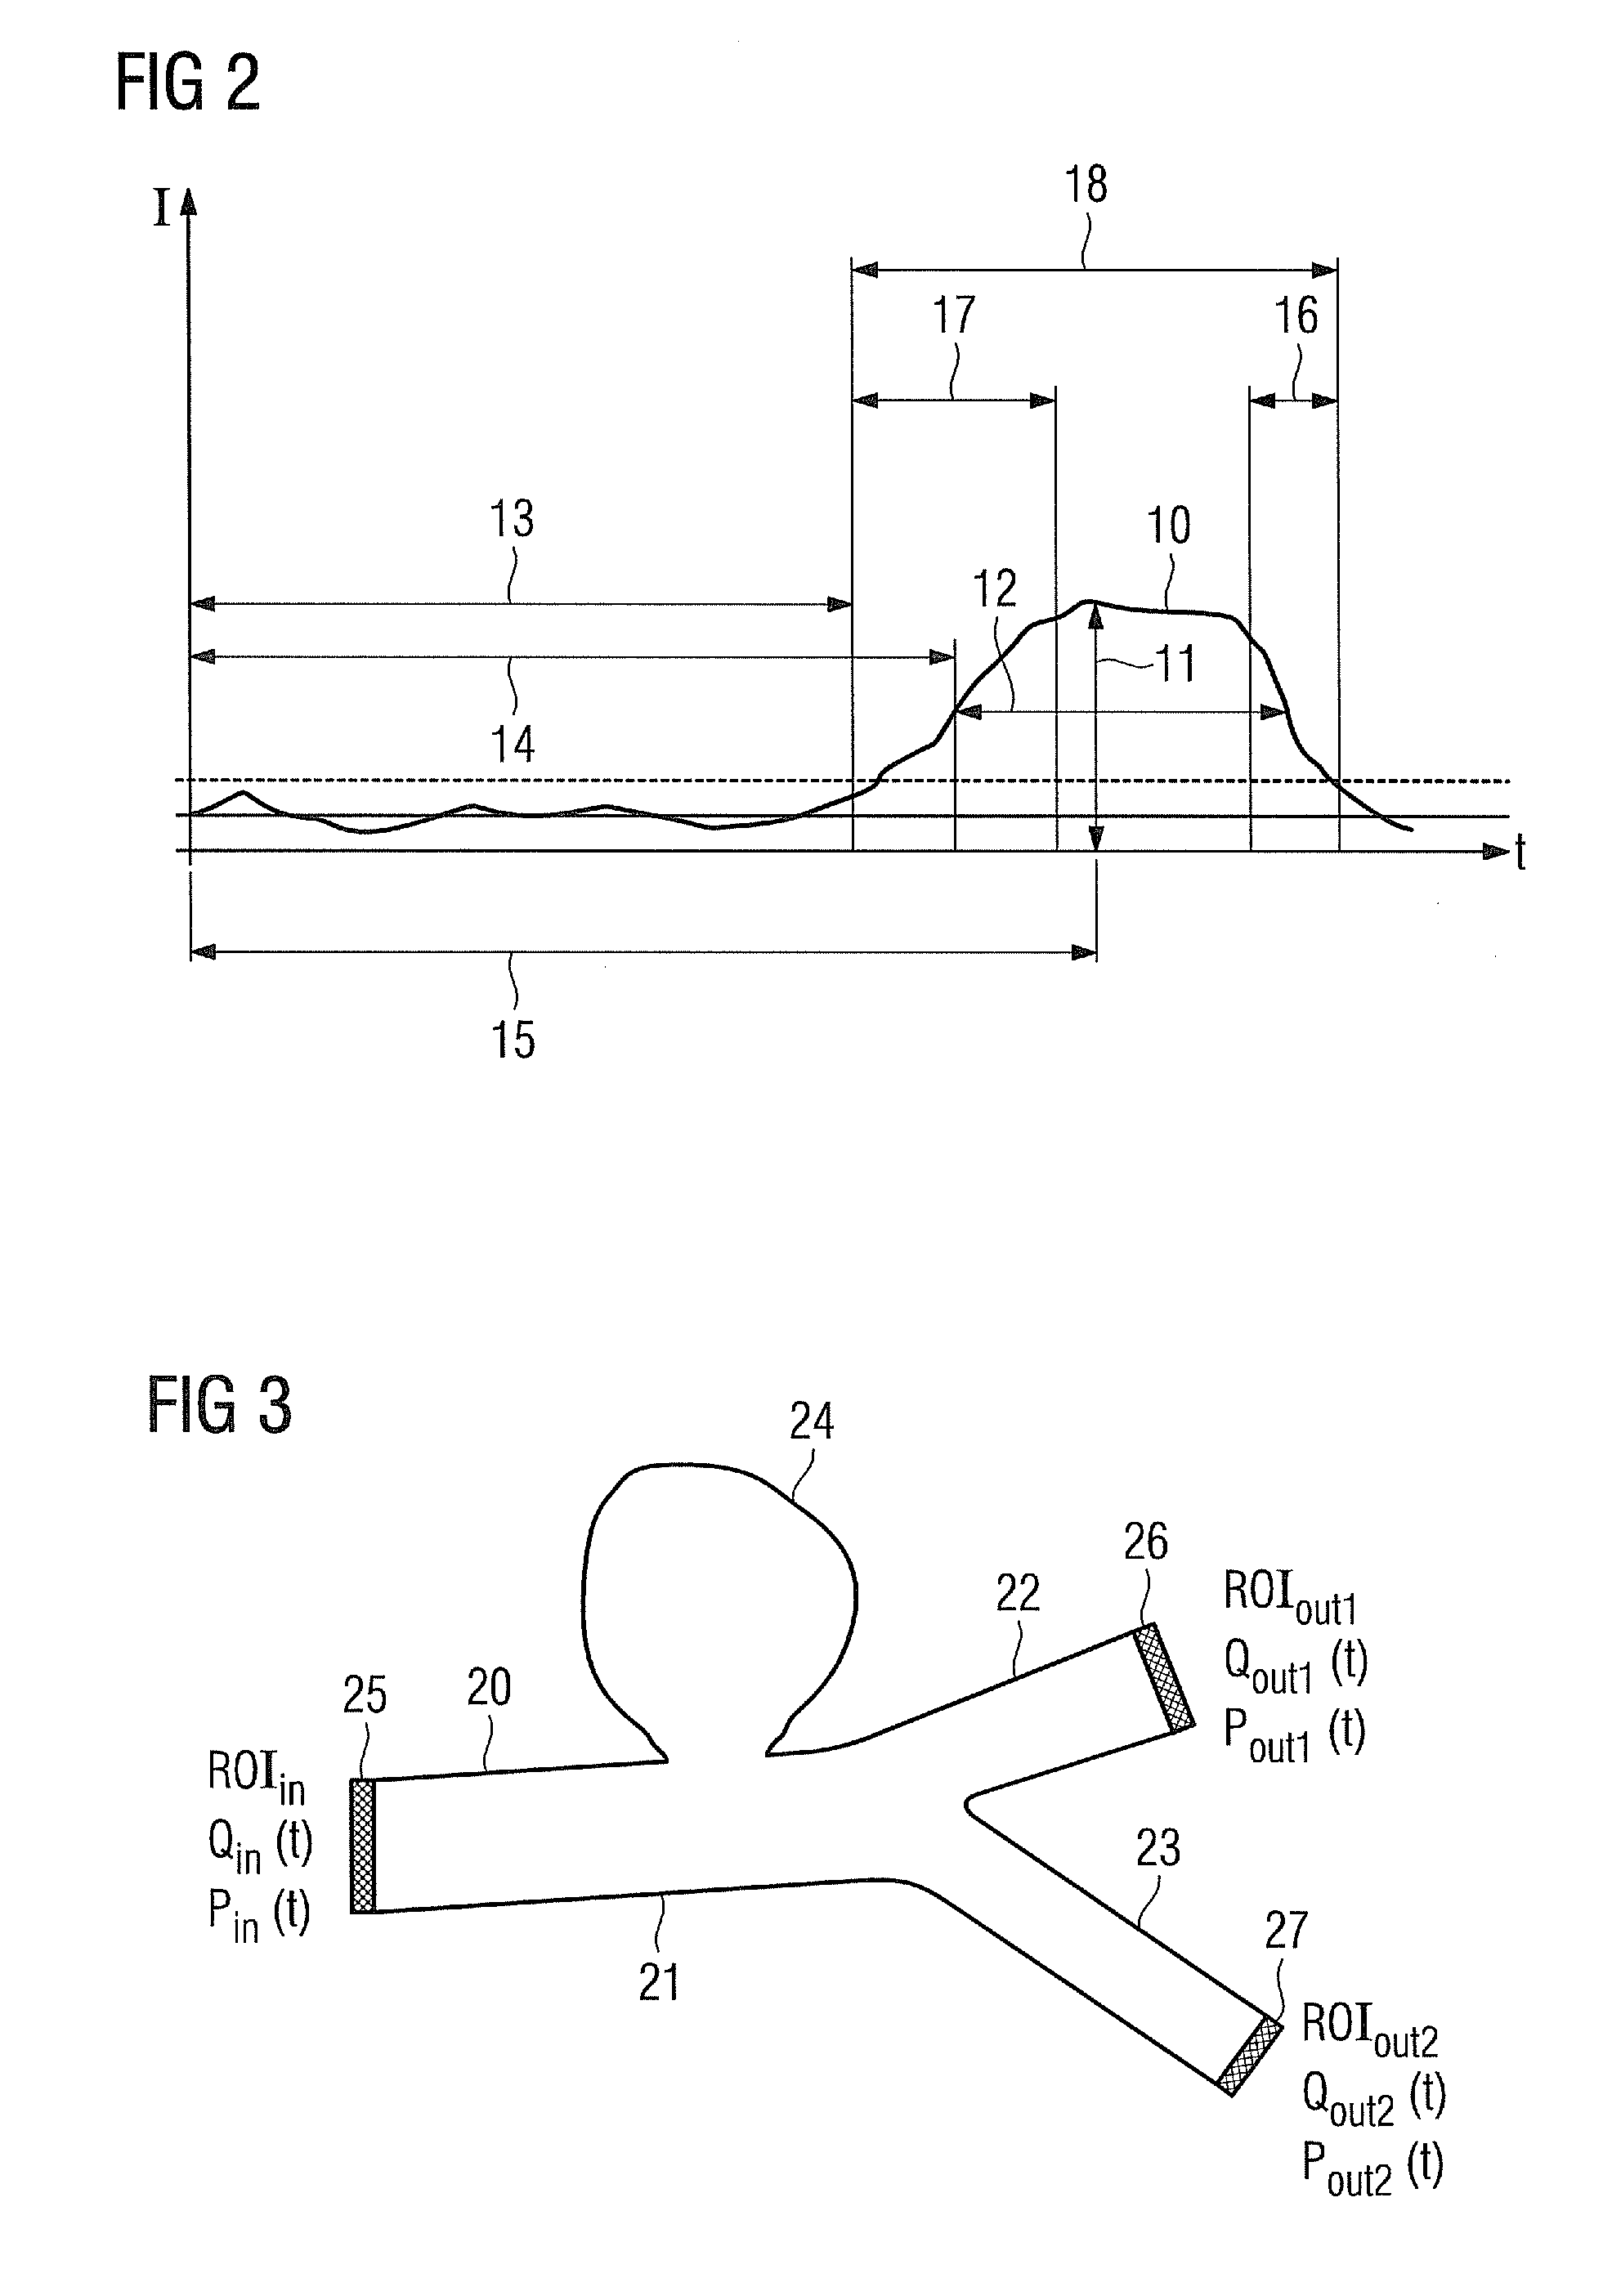 Method for simulating a blood flow